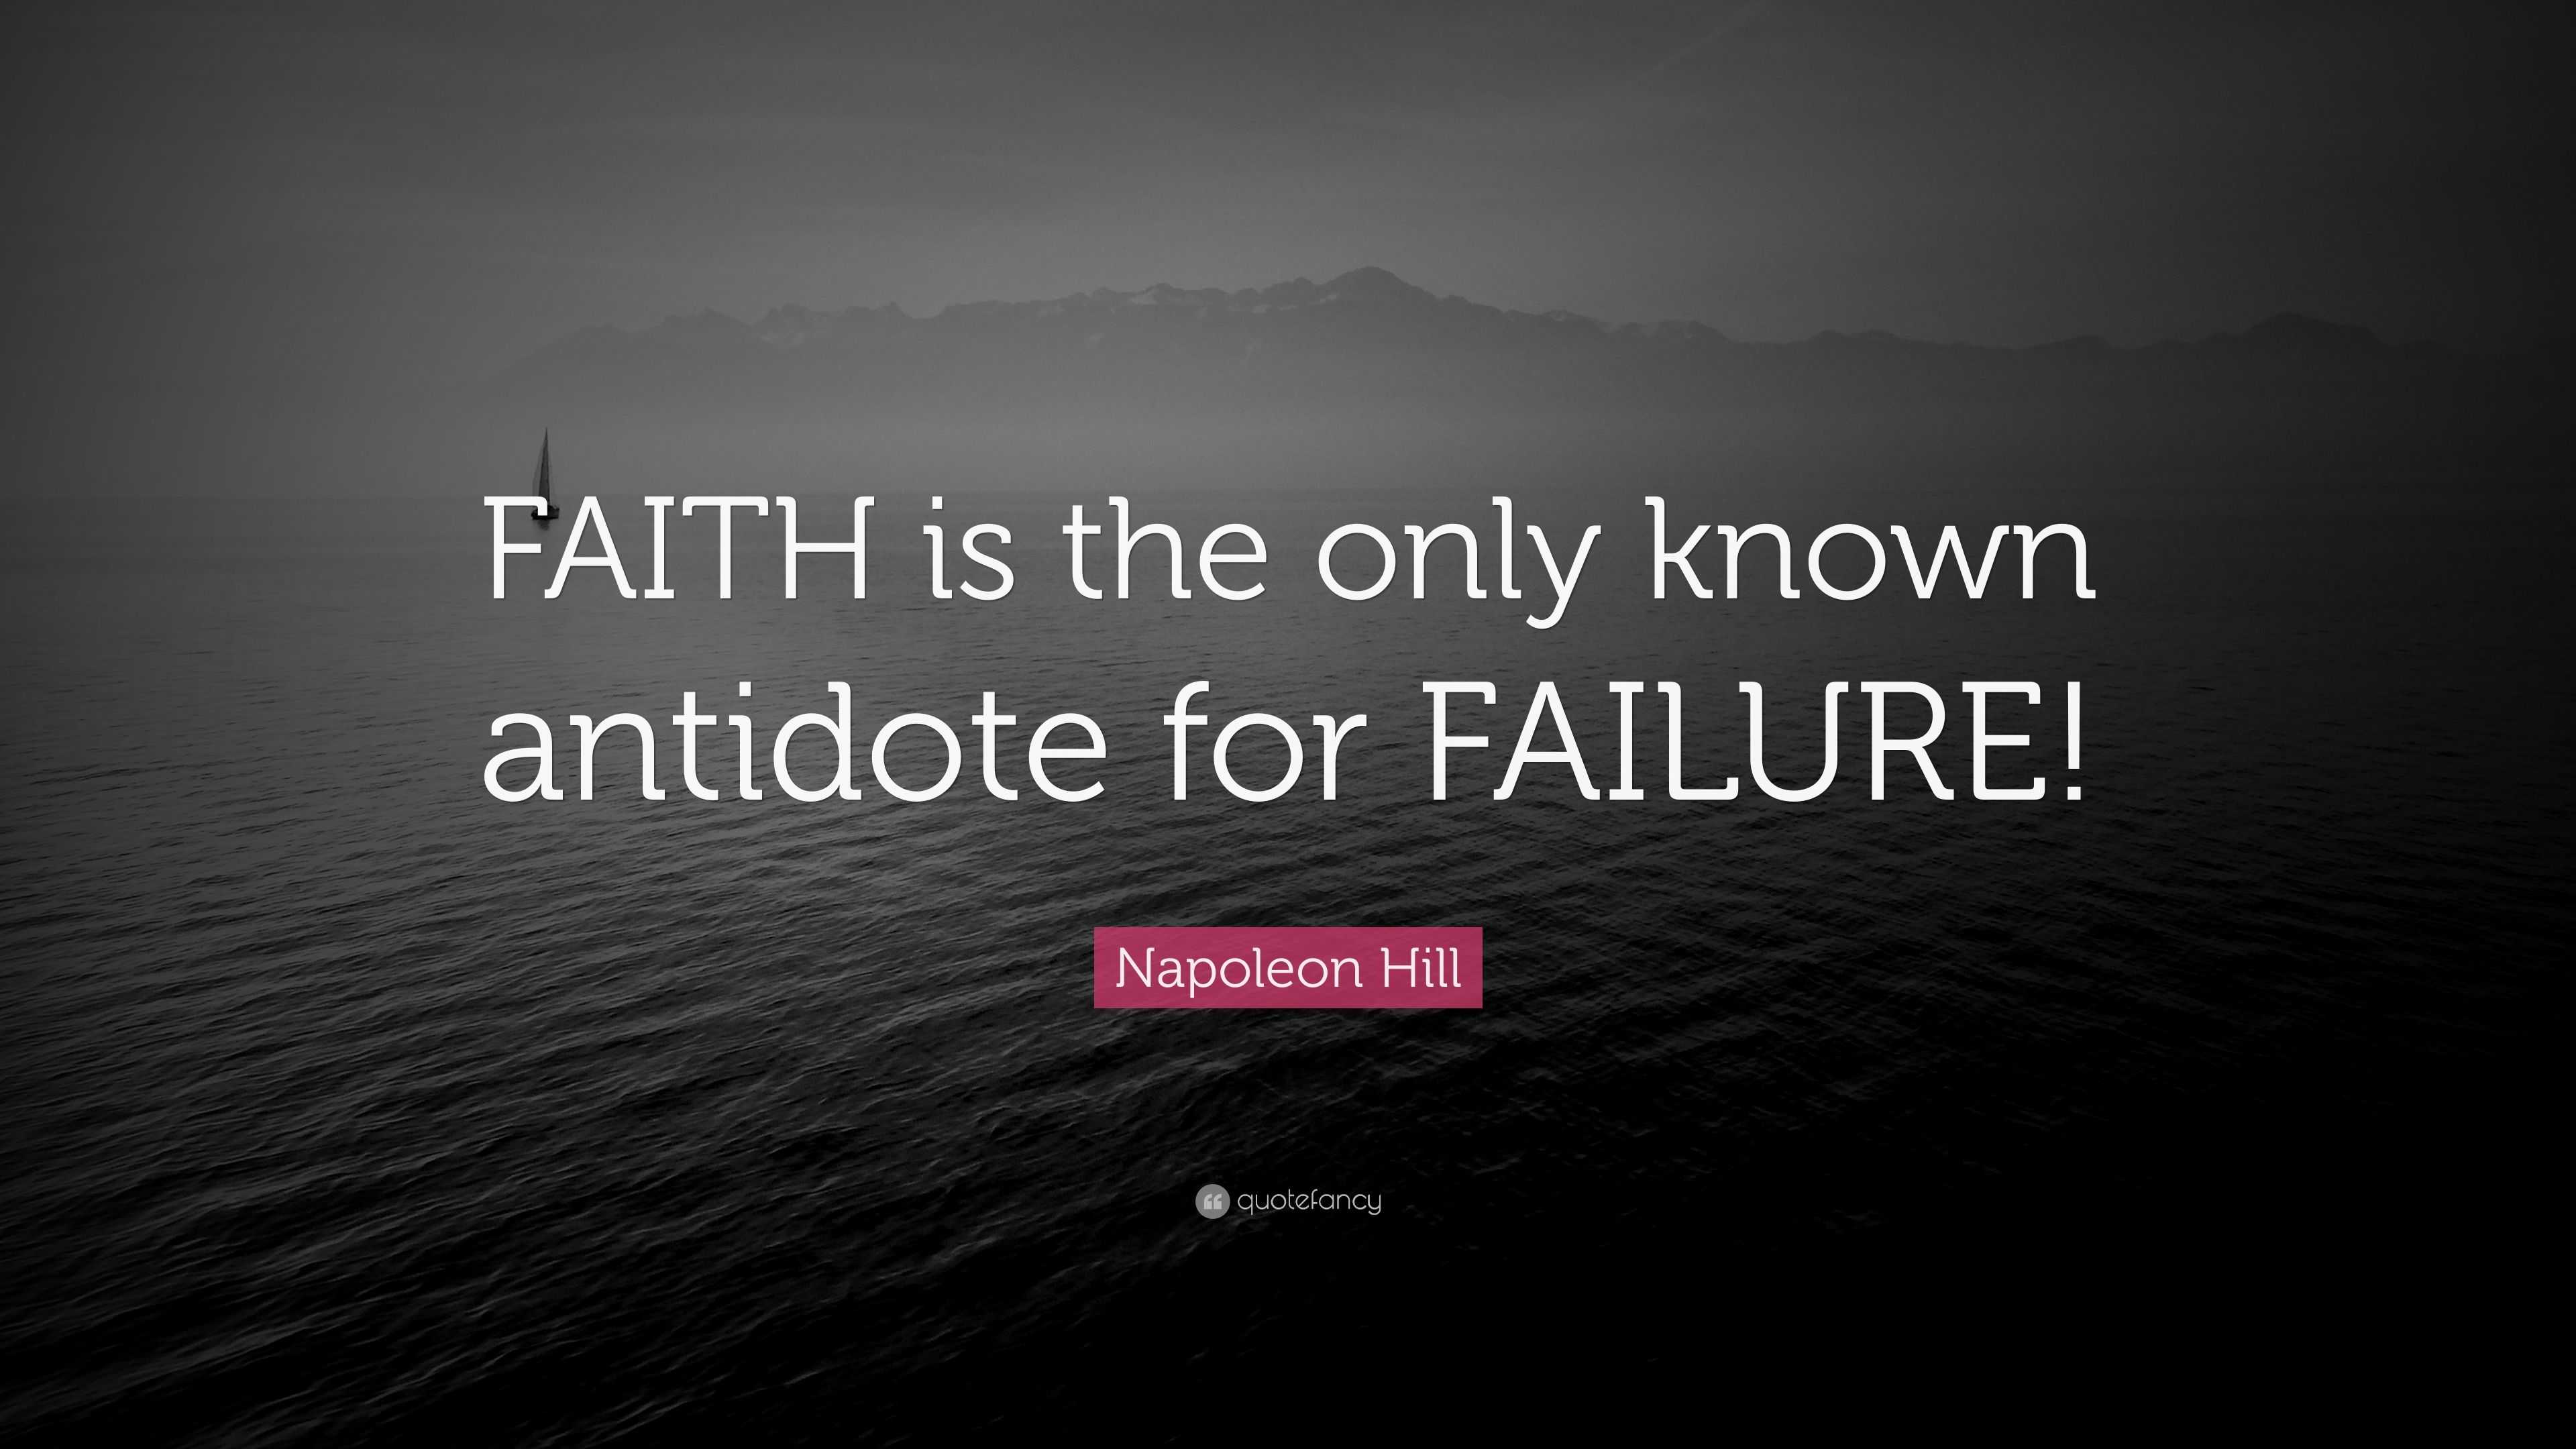 Napoleon Hill Quote: “FAITH is the only known antidote for FAILURE!”